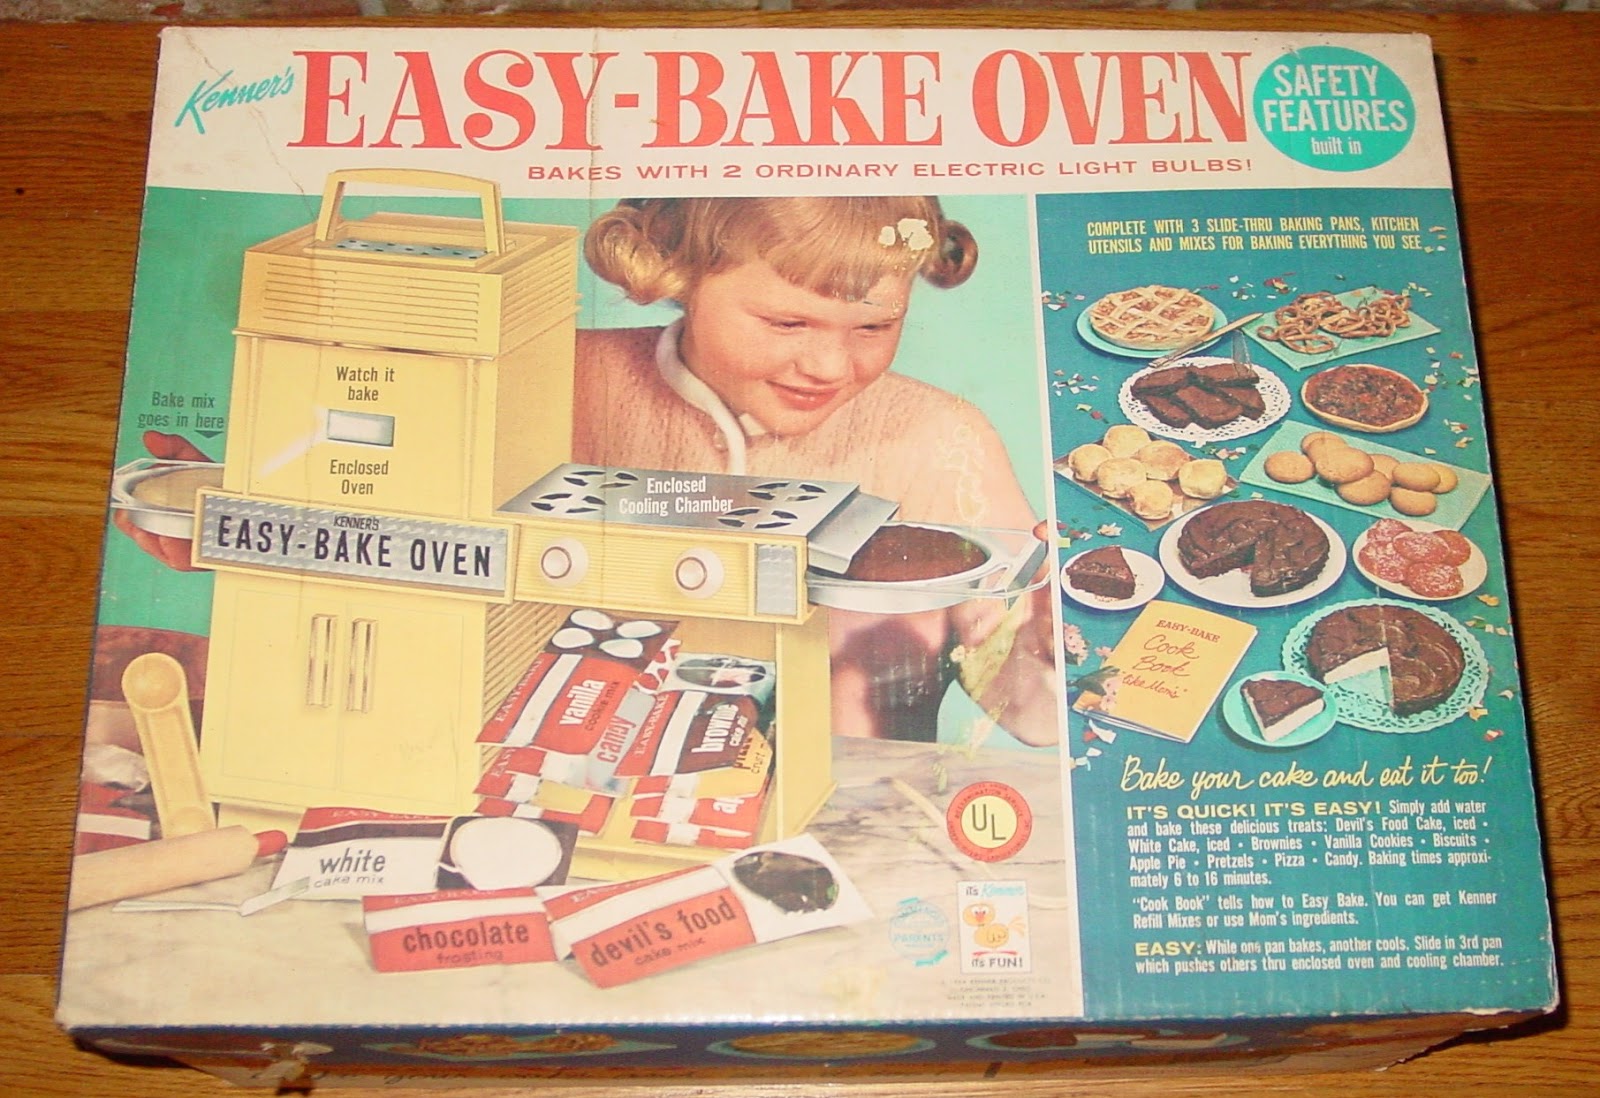 vintage toys - old easy bake oven box - KeasyBake Ovenners Safety Features built in Bakes With 2 Ordinary Electric Light Bulbs! Complete With 3 SlideThru Baking Pans, Kitchen Utensils And Mixes For Baking Everything You See Watch it bake Bake mix goes in 